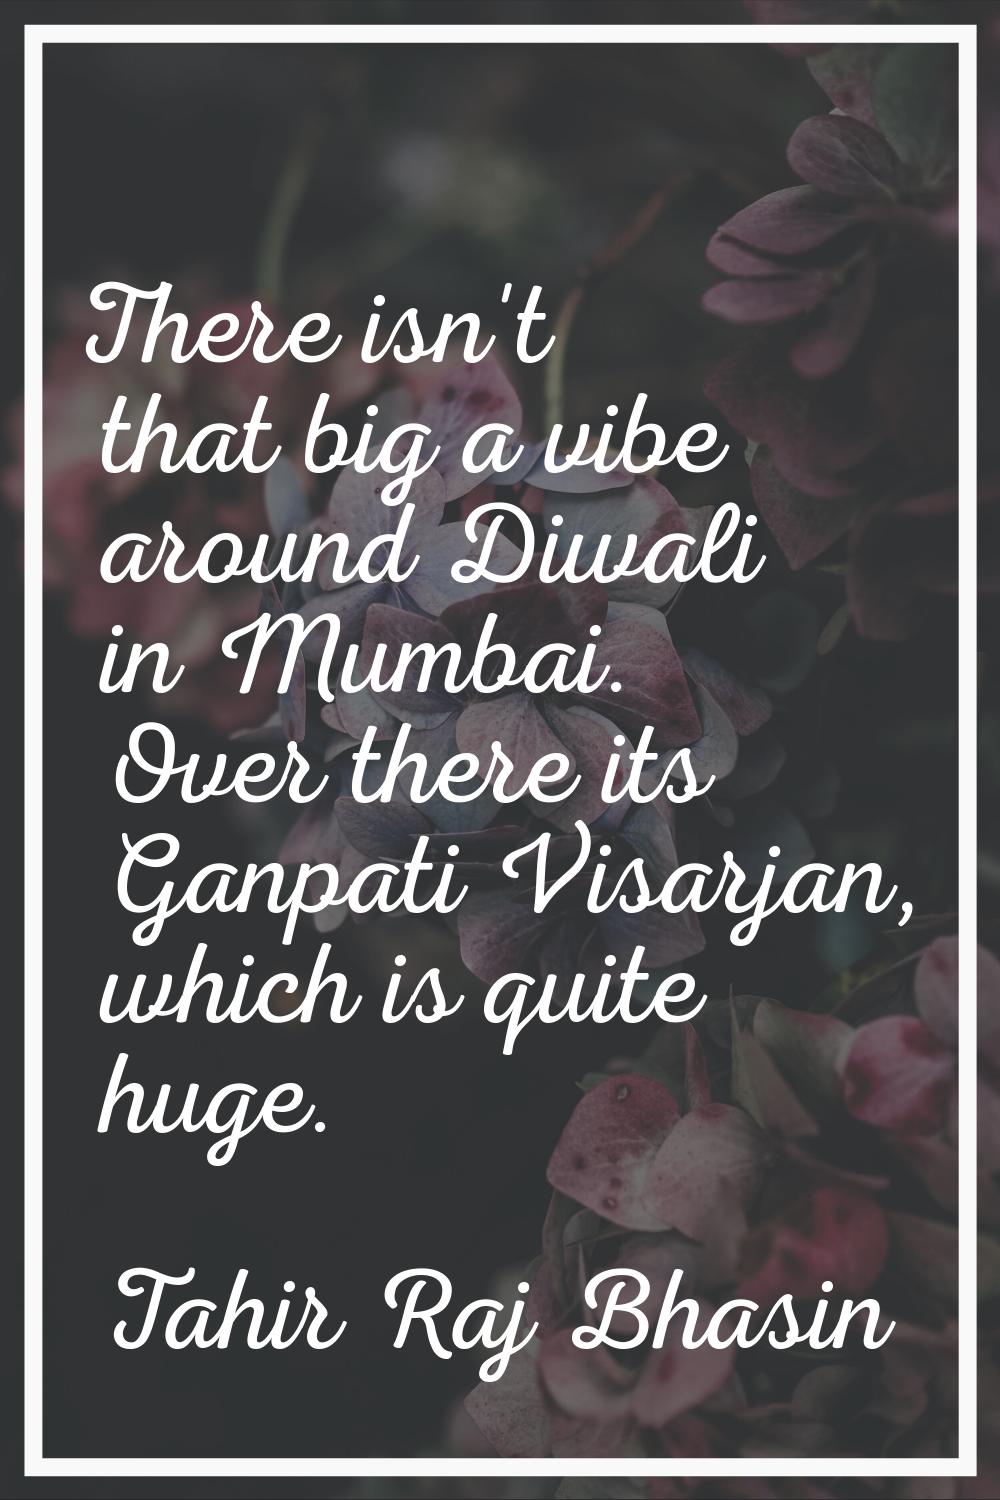 There isn't that big a vibe around Diwali in Mumbai. Over there its Ganpati Visarjan, which is quit